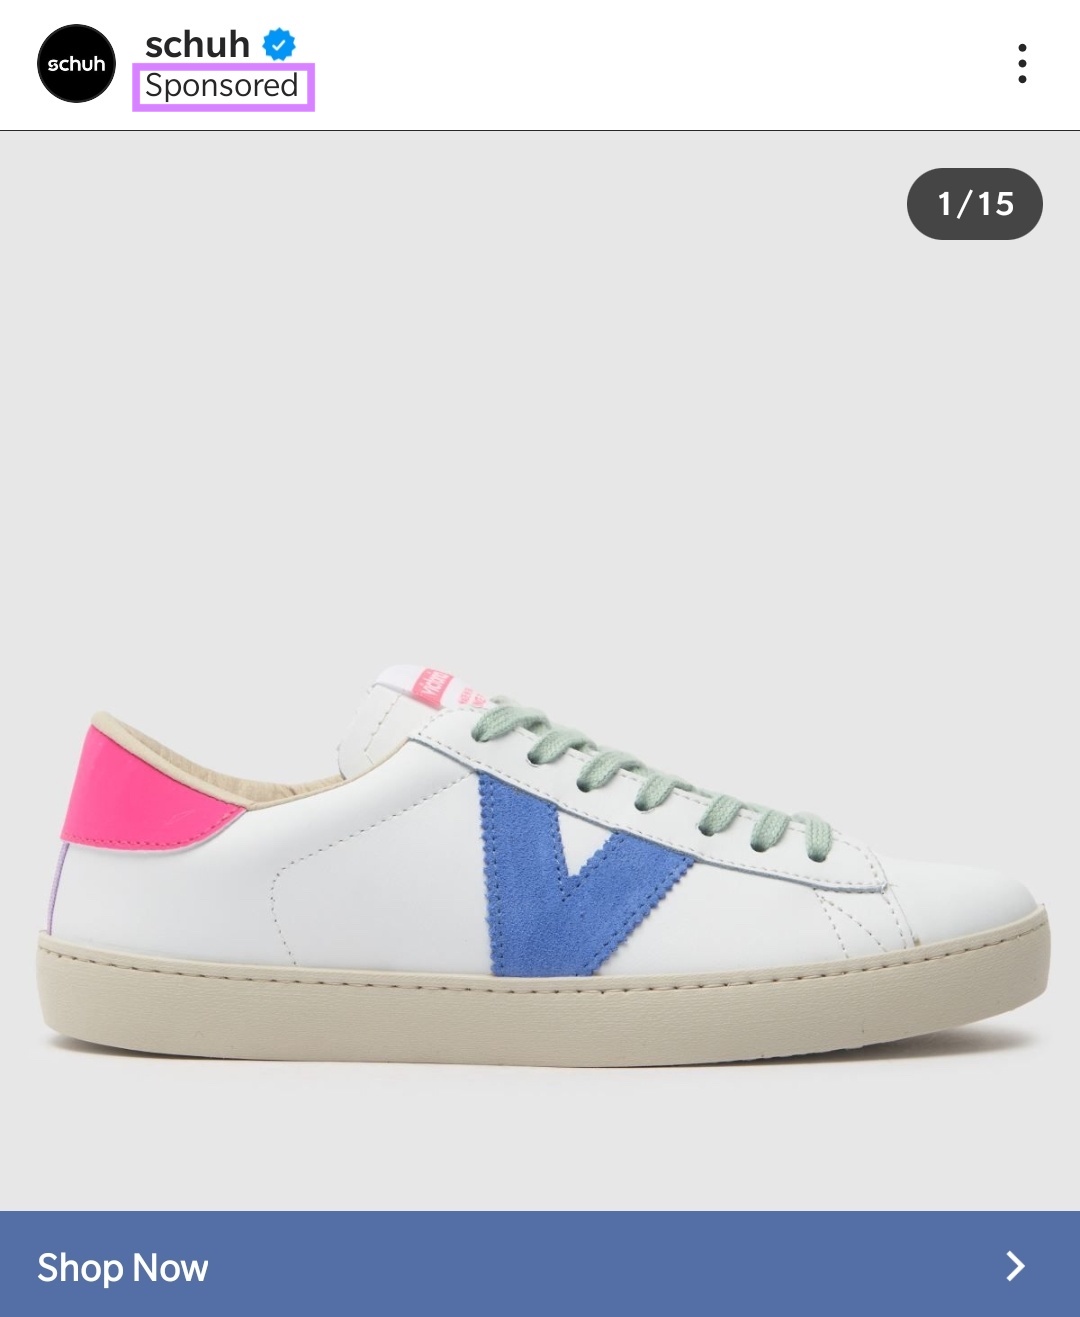 An Instagram in-app ad for Veja sneakers by schuh